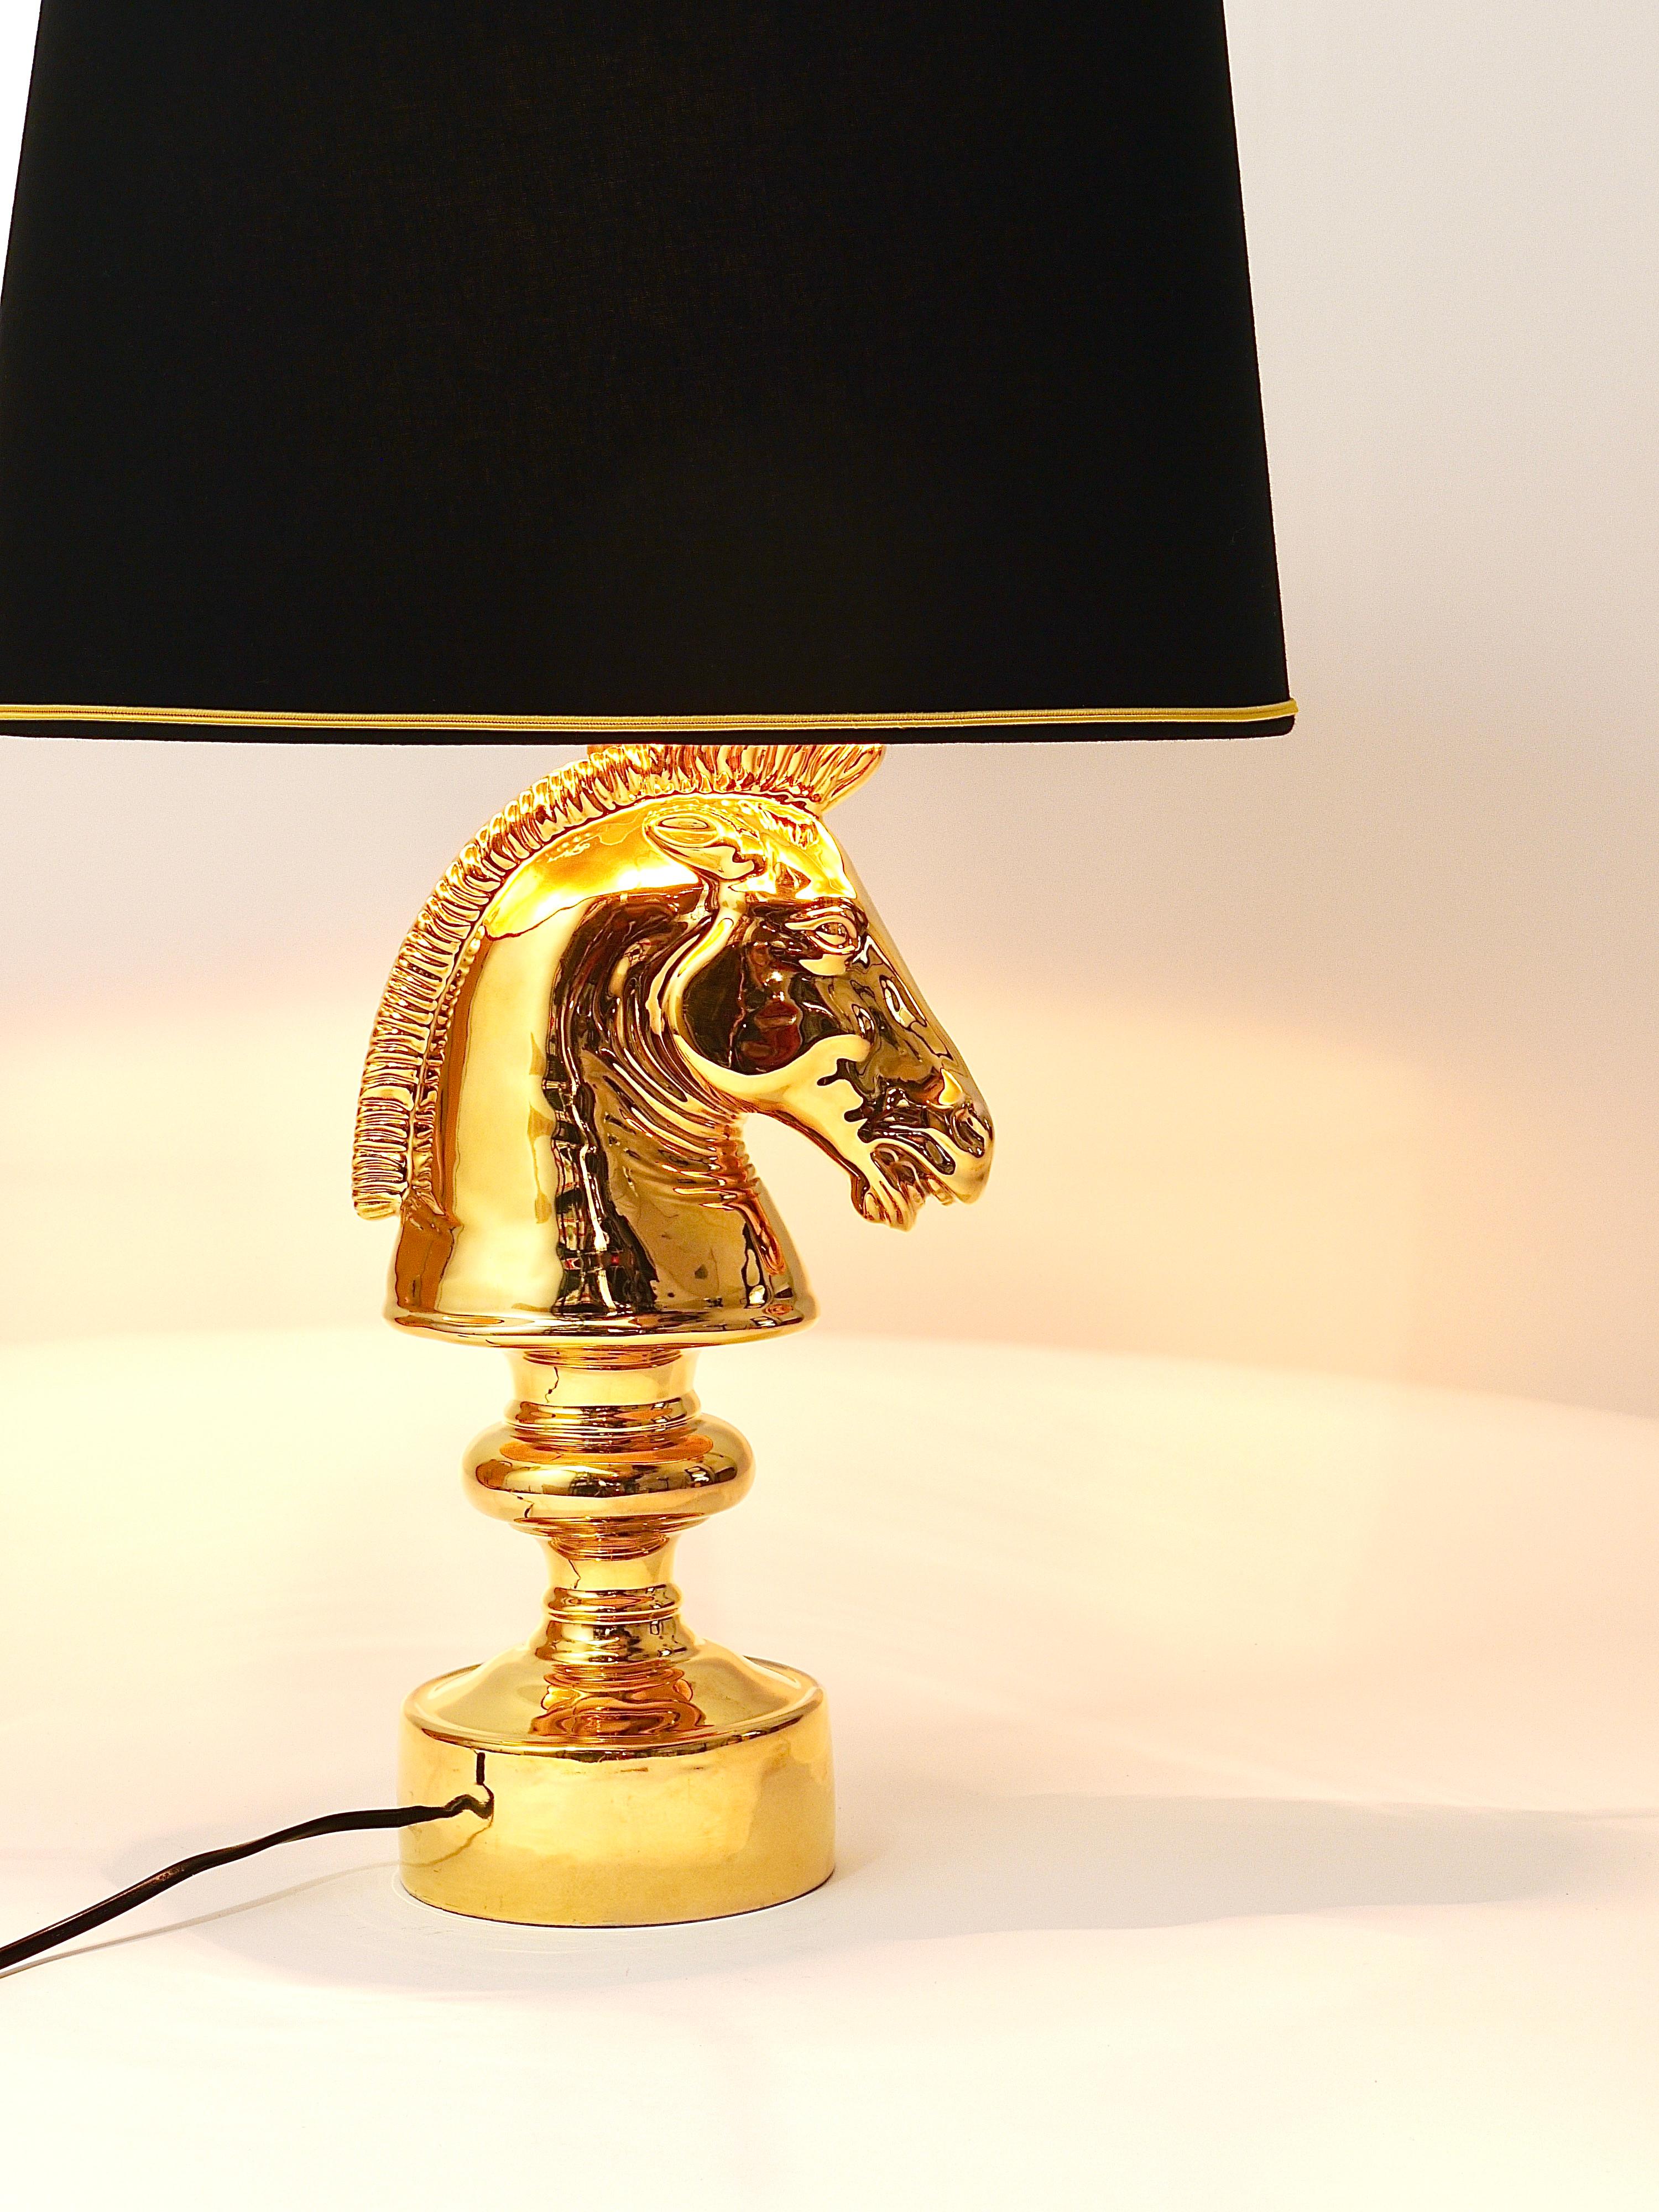 A gold-plated sculptural Hollywood Regency style table lamp from the 1970s in the shape of a horse chess piece. Made of ceramic by Behrend Firenze, Italy. Signed on its underneath. In good condition, no damages, marginal signs of age in the